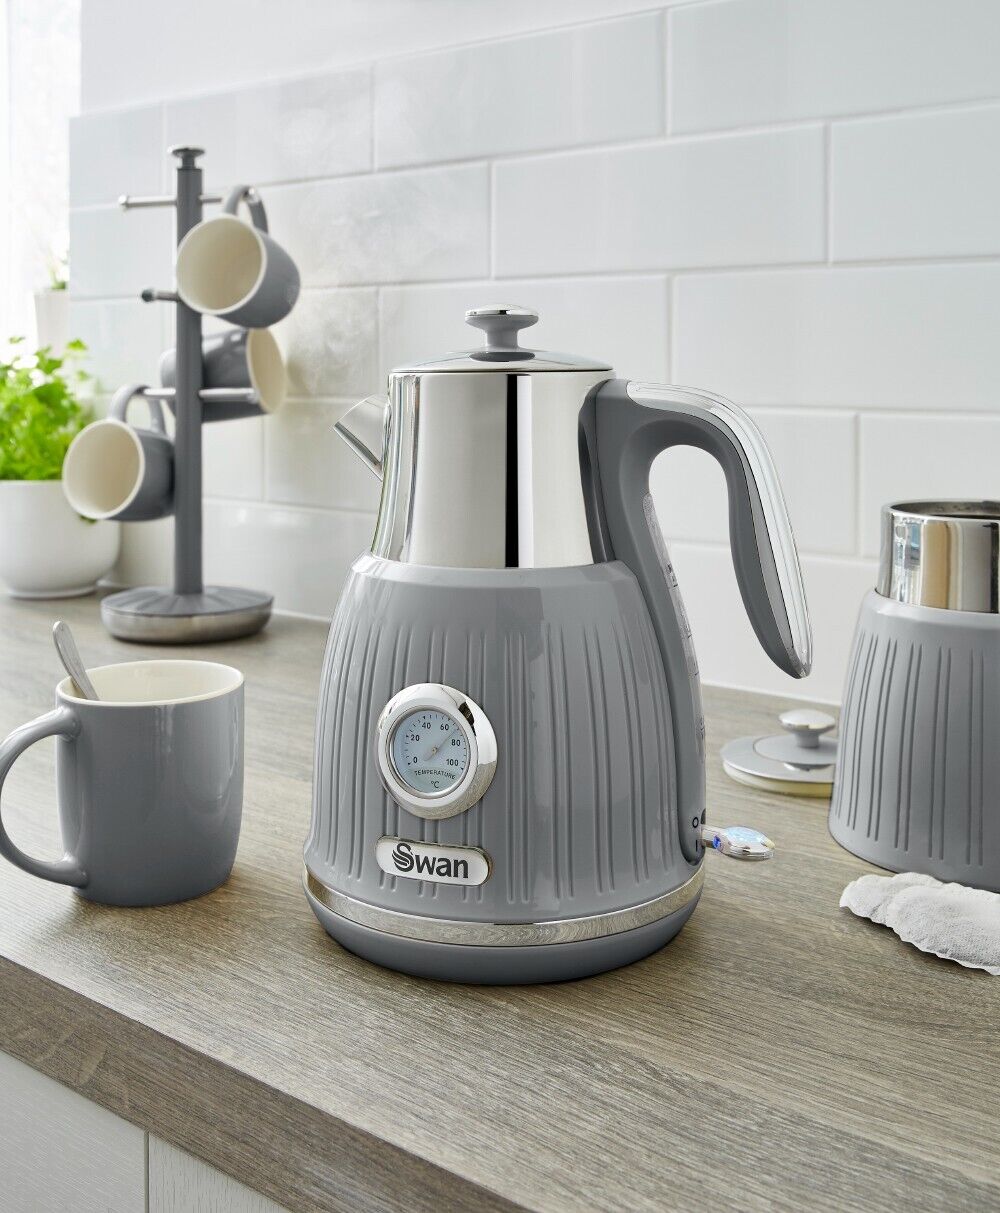 Swan Retro Grey 1.5L 3KW Kettle with Temperature Dial. Vintage Design Kettle